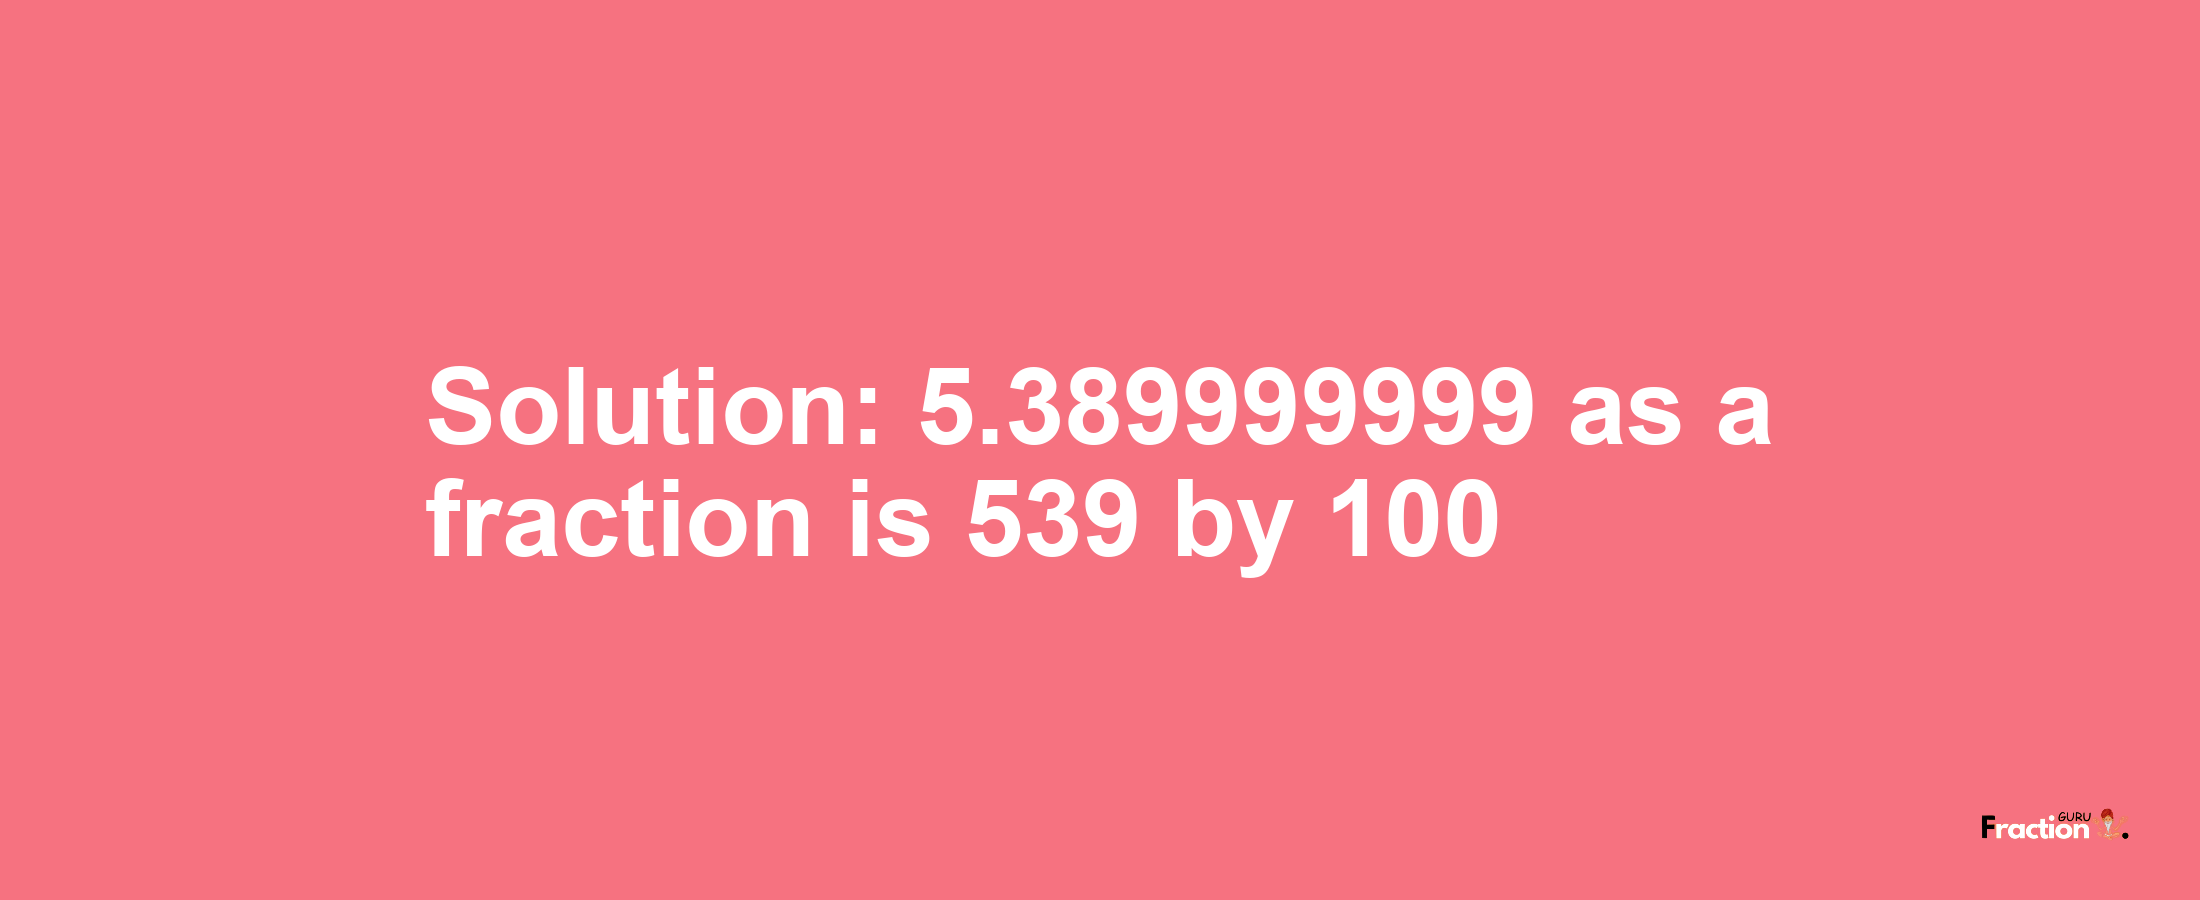 Solution:5.389999999 as a fraction is 539/100